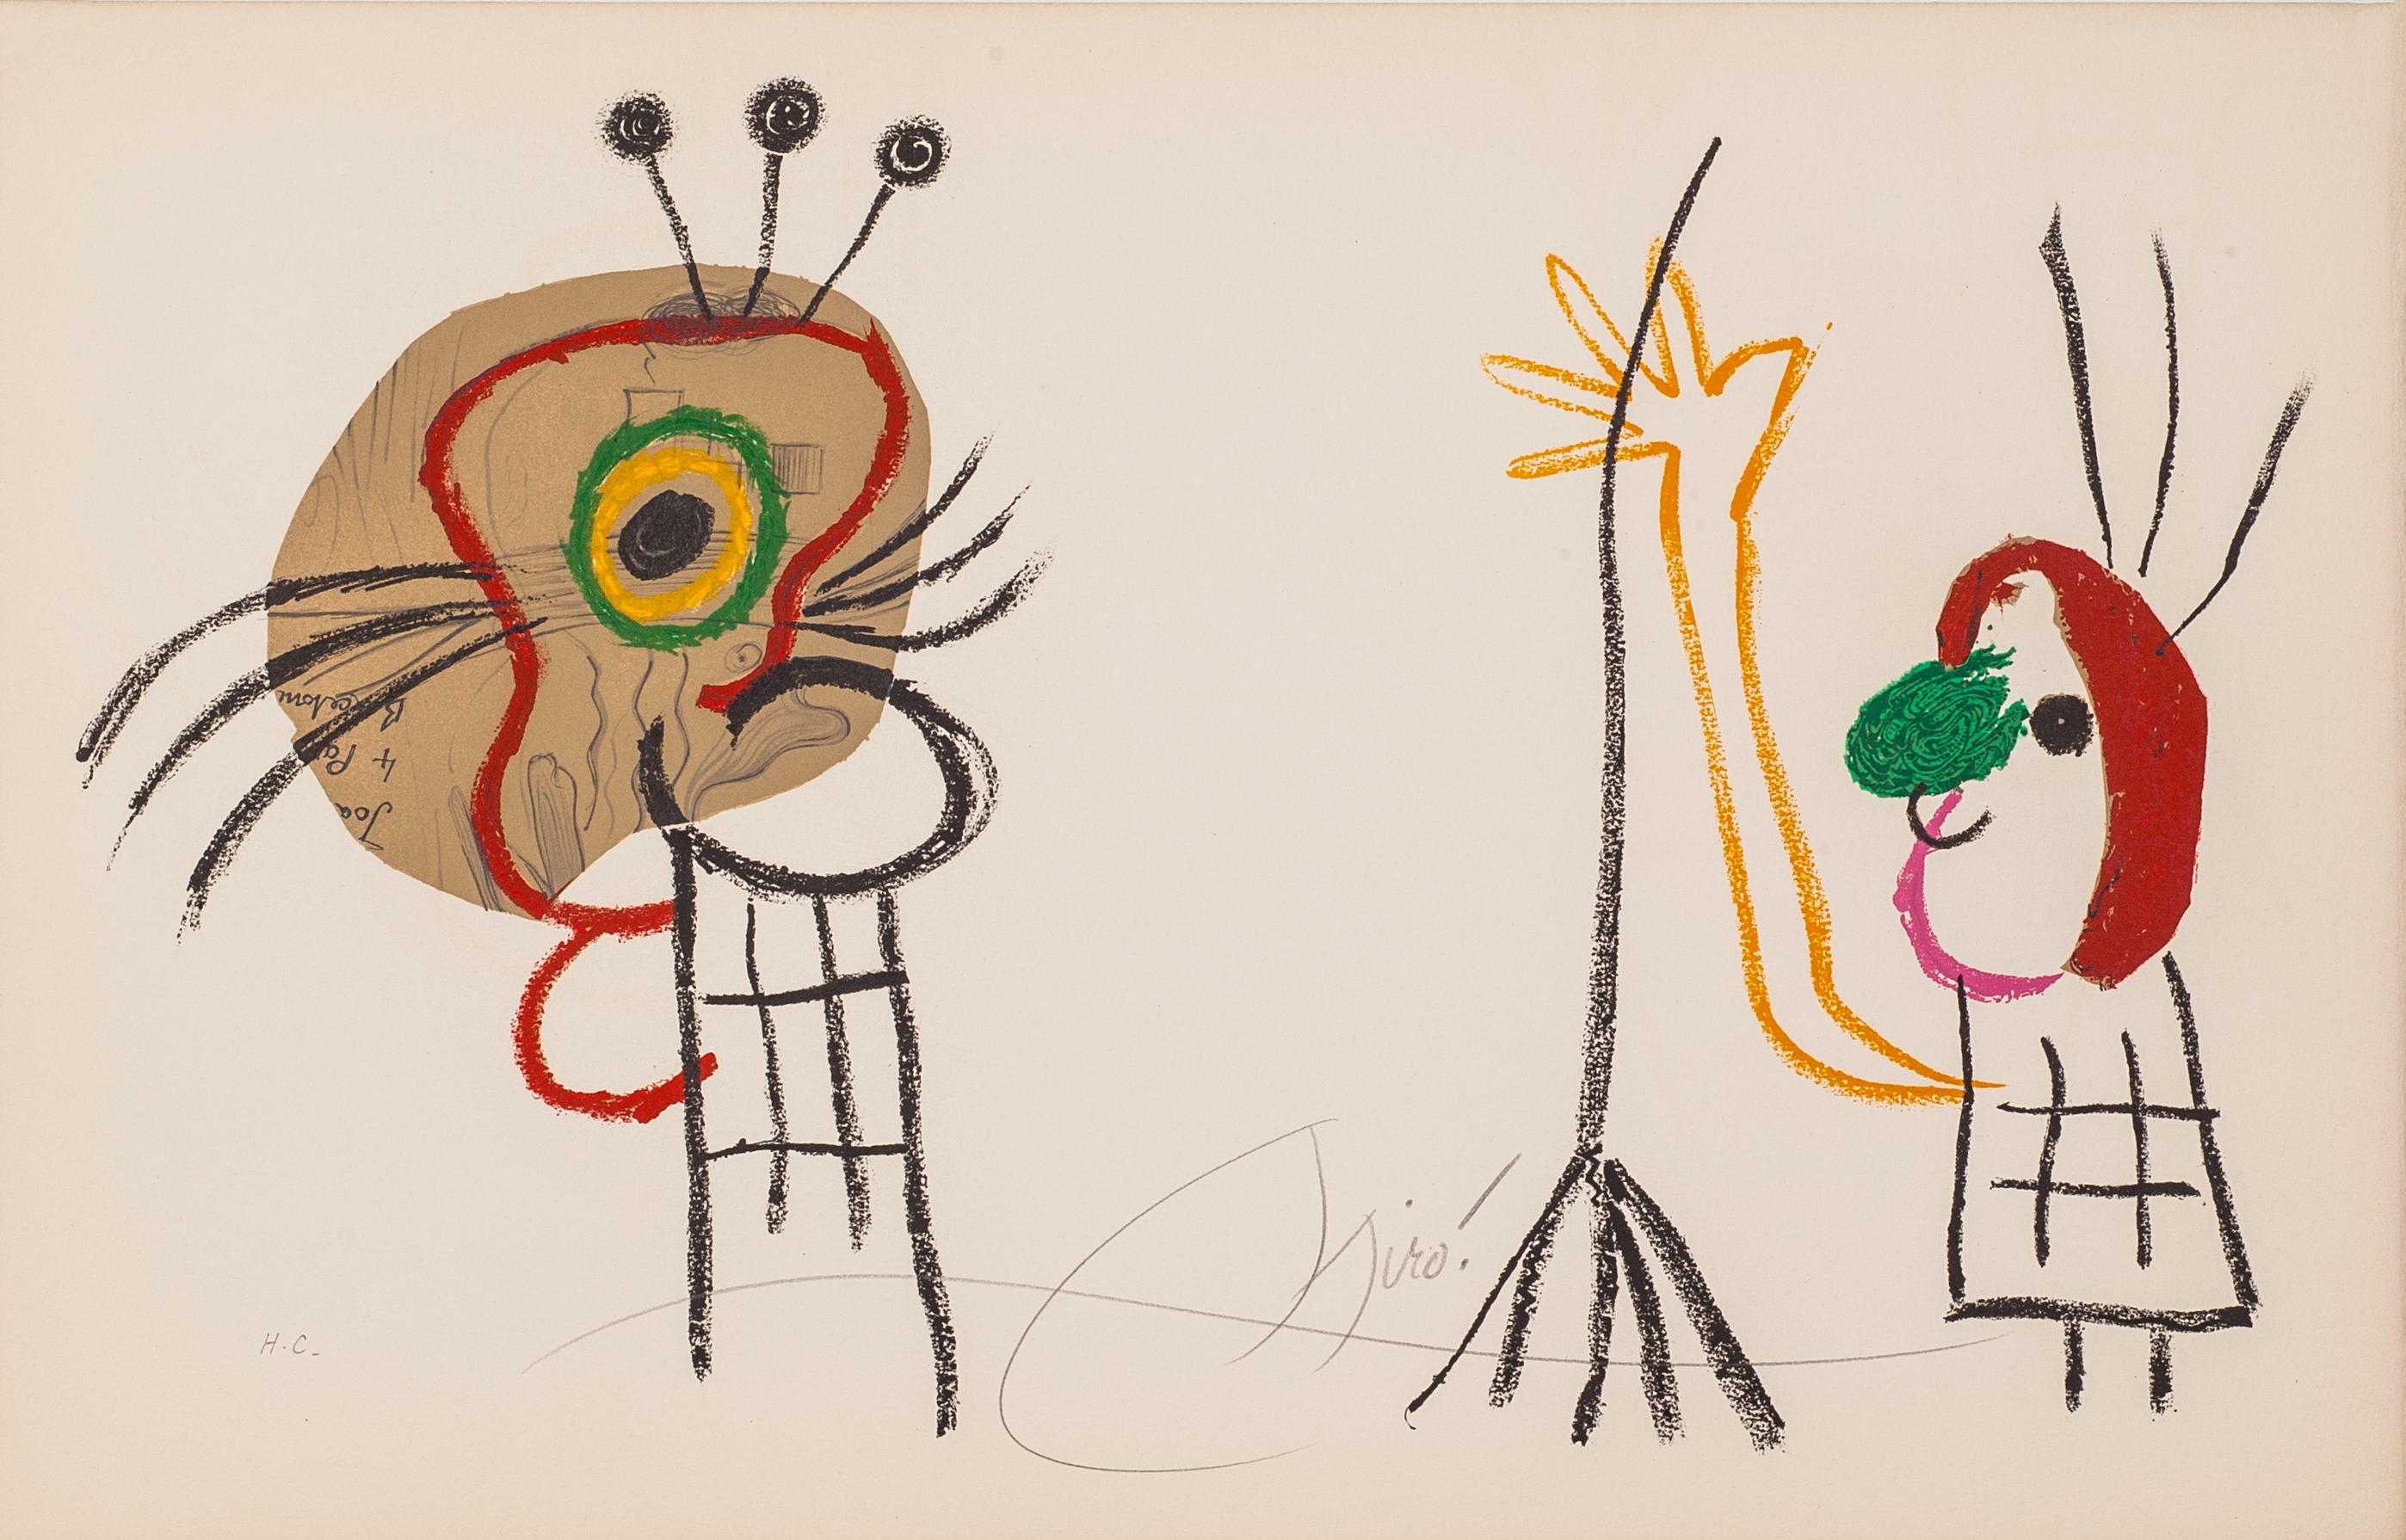 plate 1019 from the portfolio "L'Enfance d'UBU". Original Lithograph. Signed - Print by Joan Miró